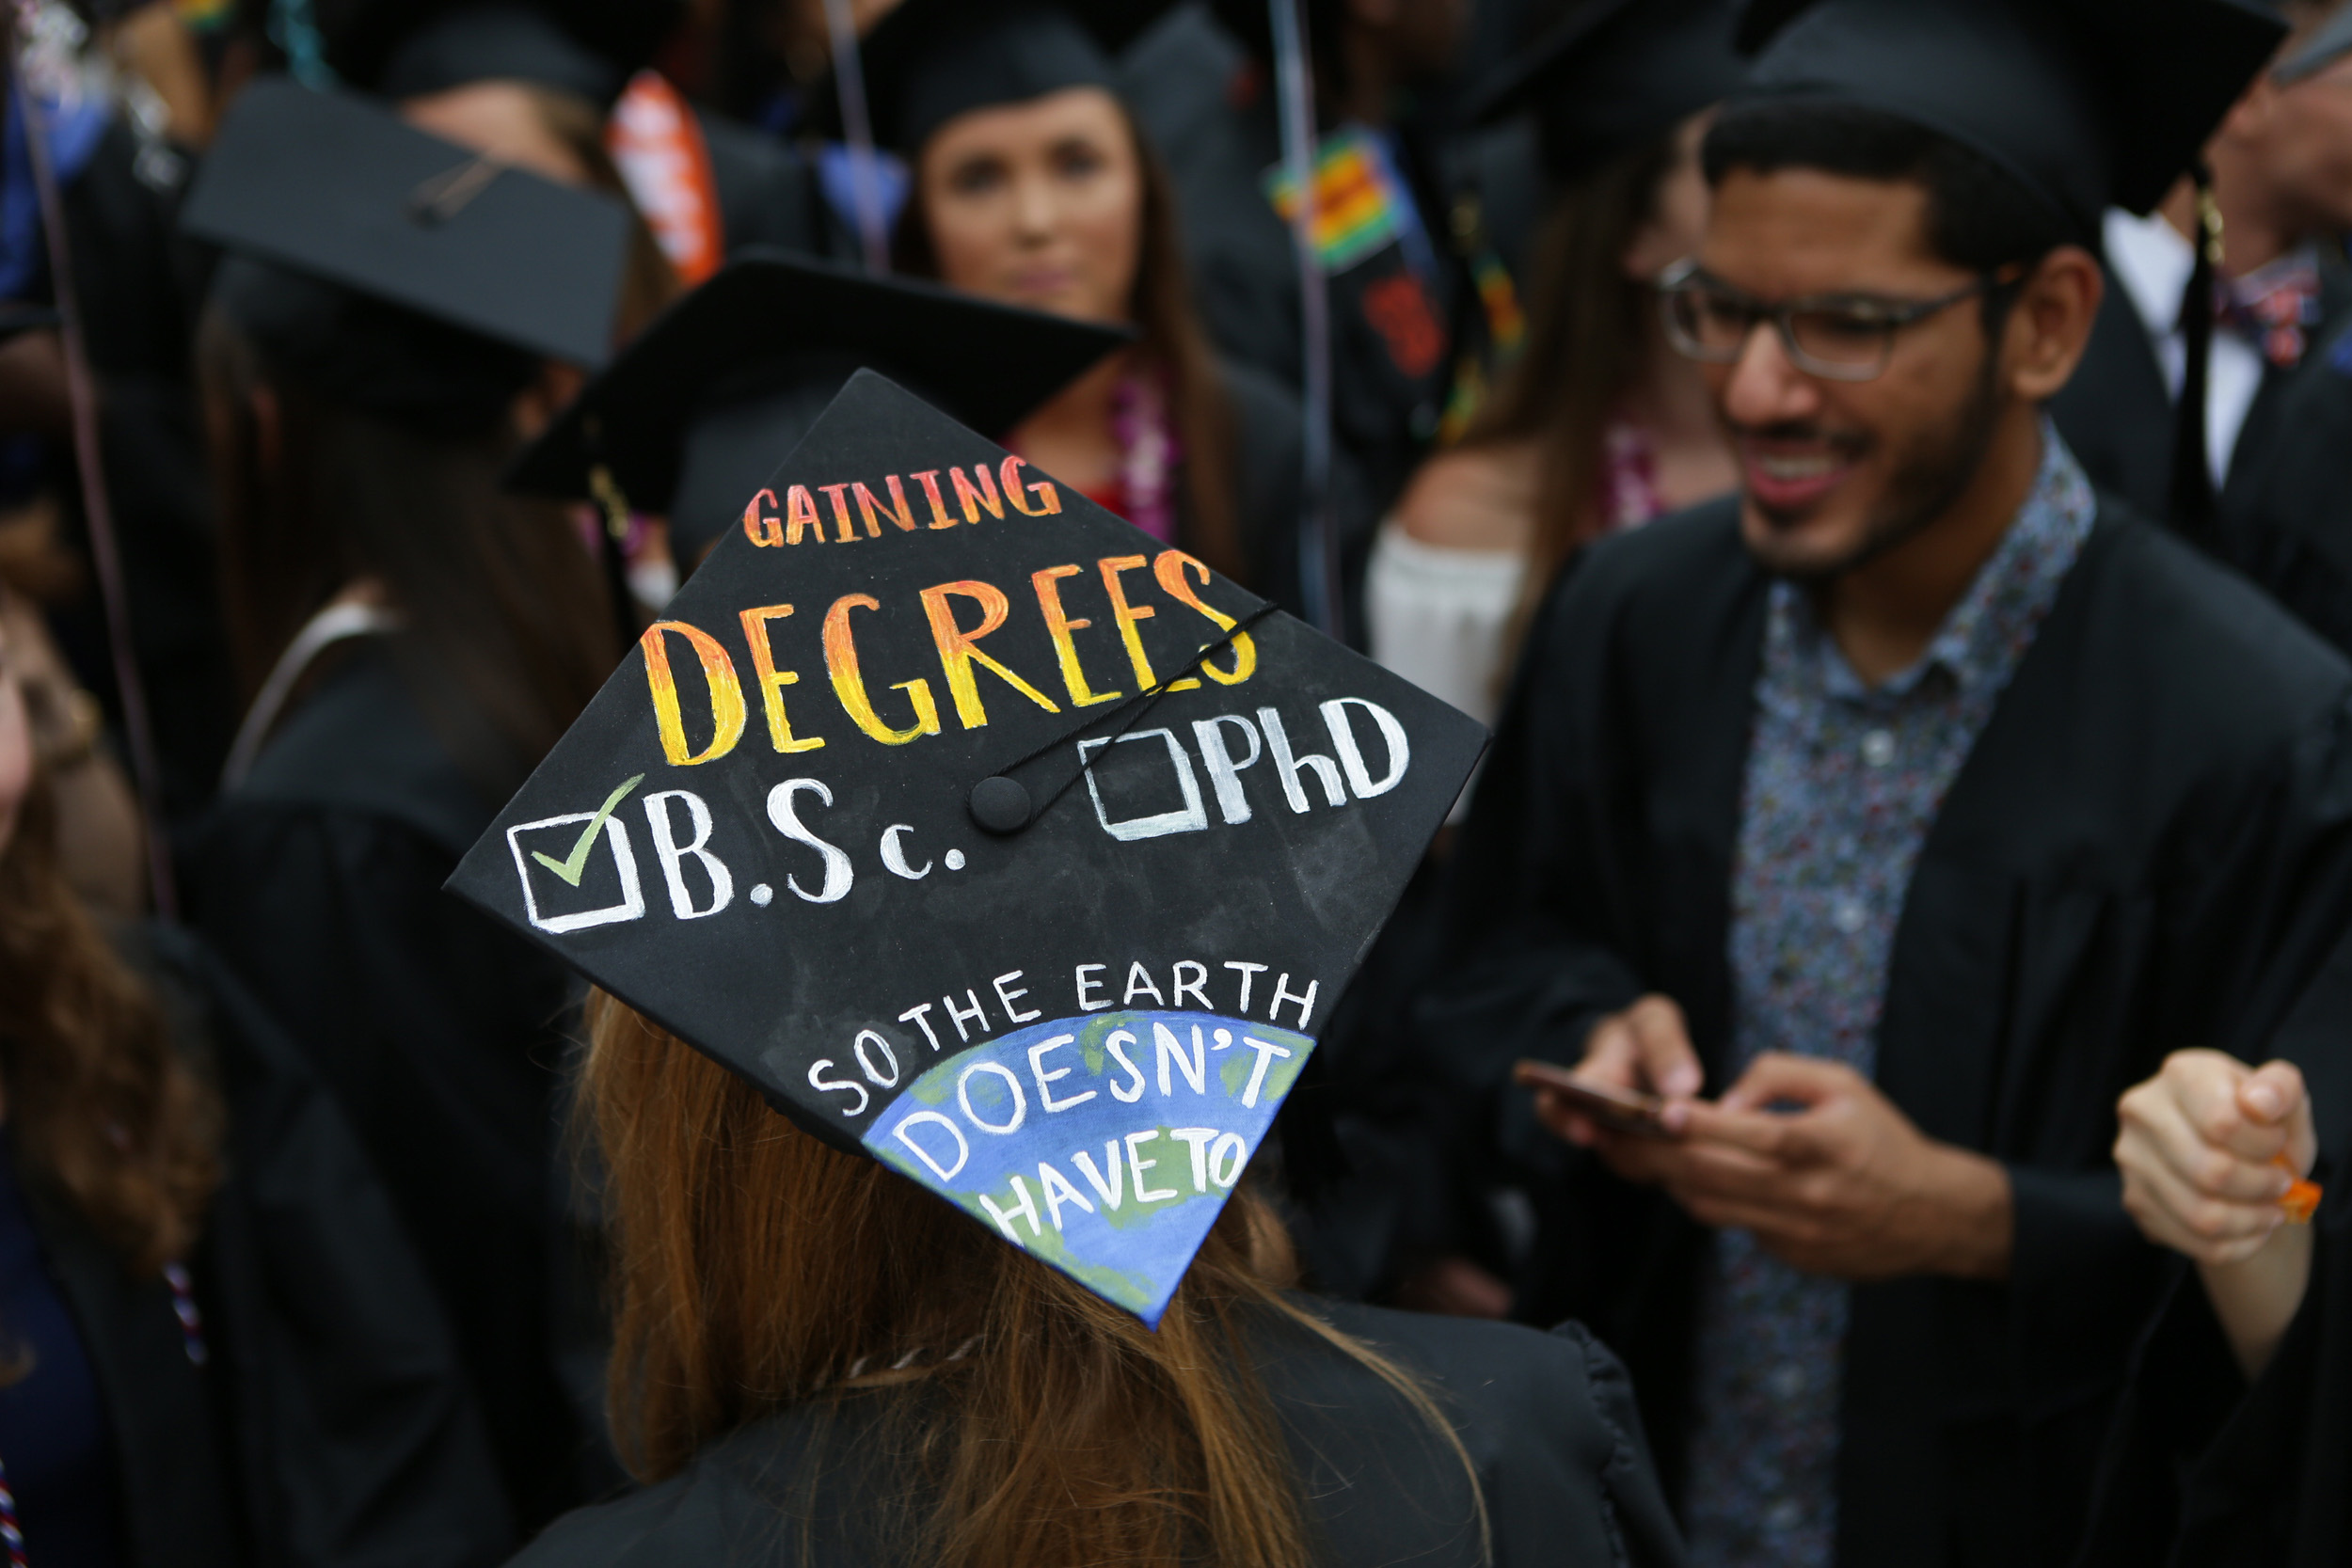 graduation cap reads: Gaining degrees B.Sc. (checkbox - checked). PHD (checkbox empty). So the earth doesn't have to 